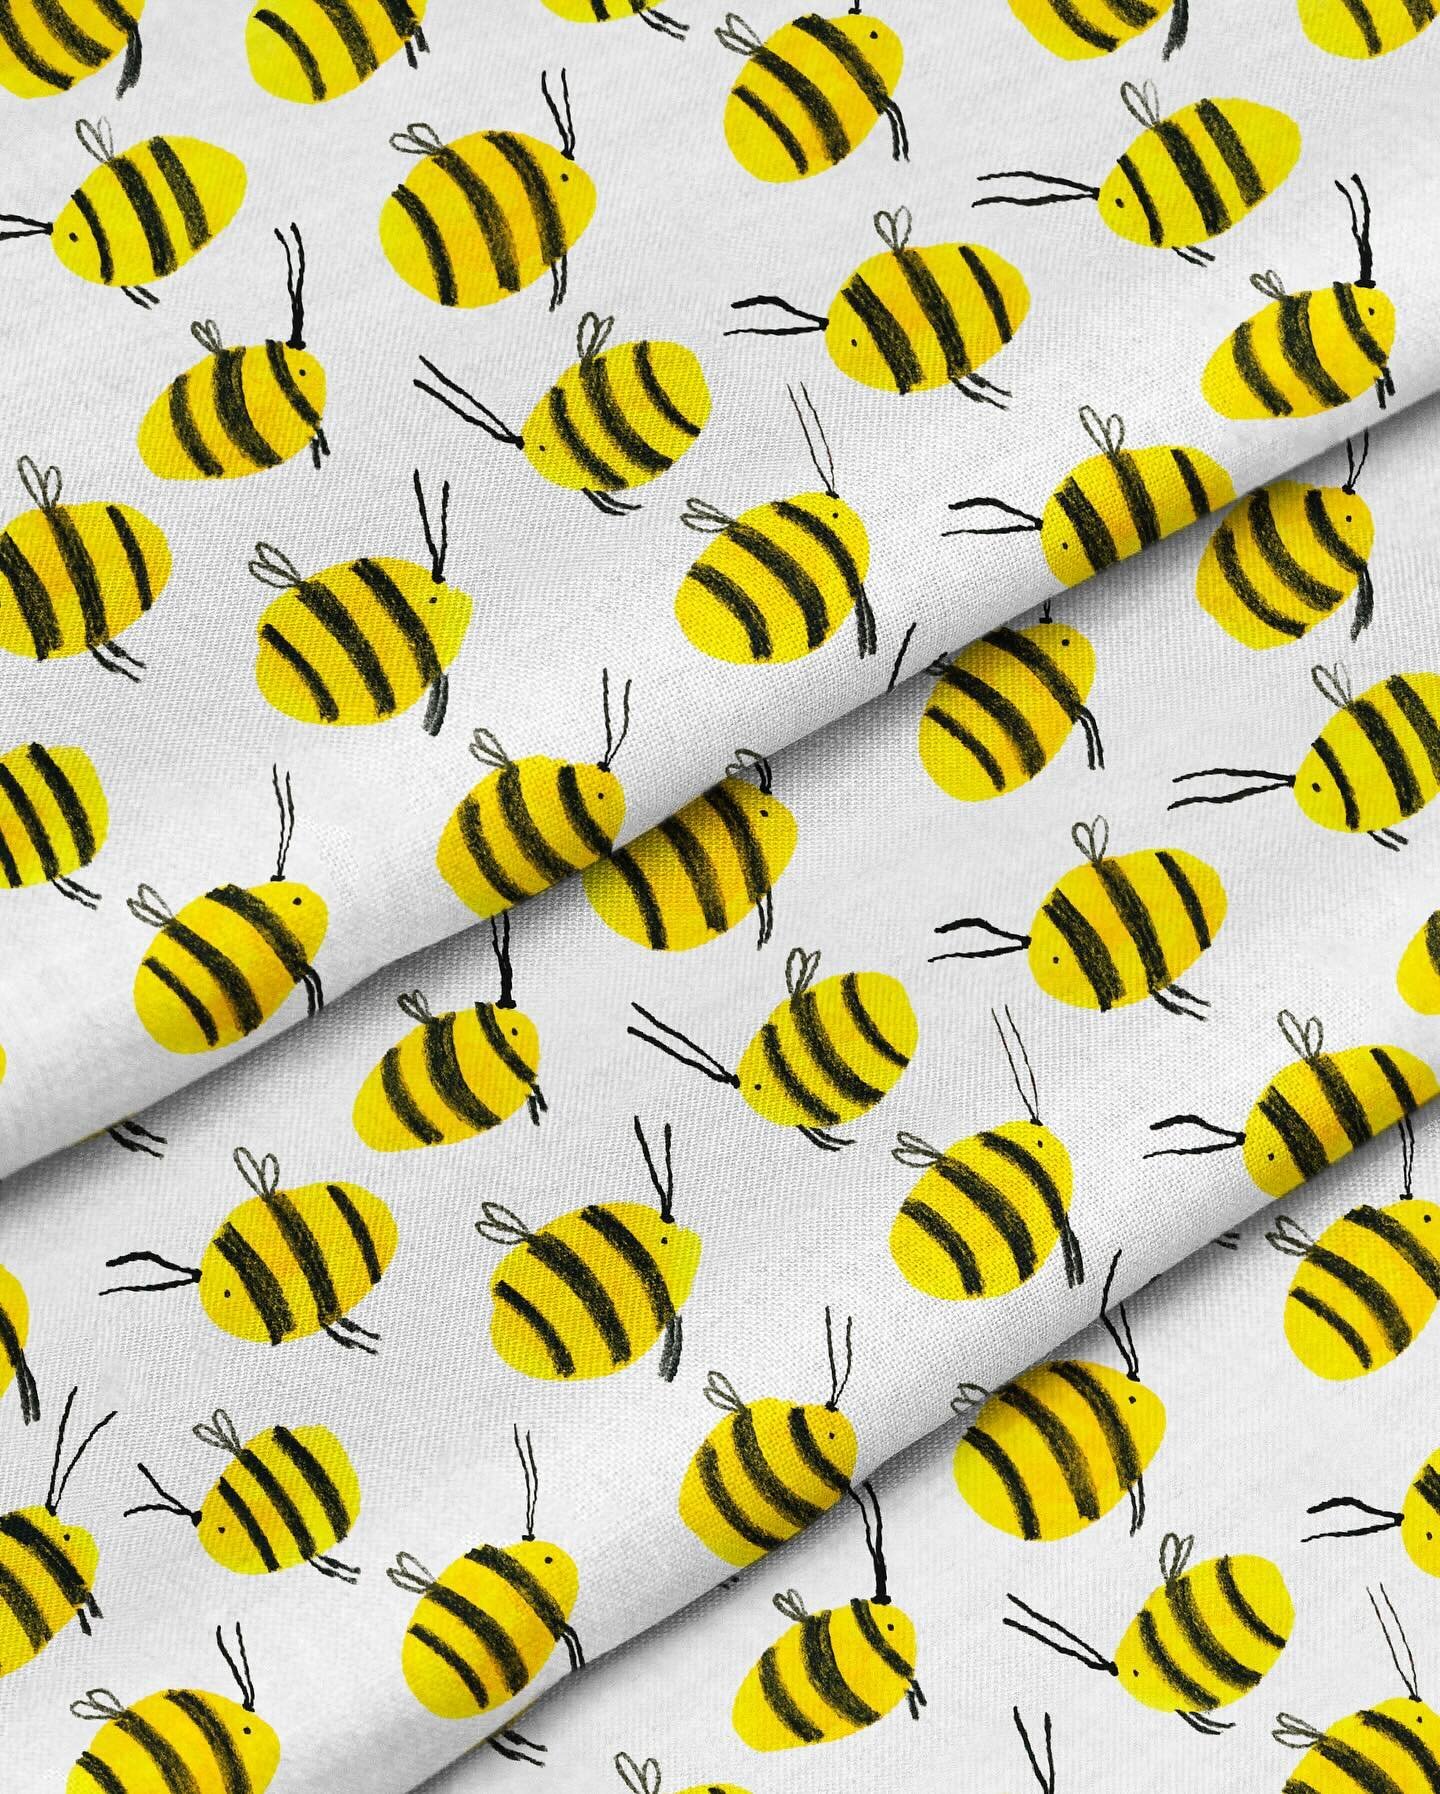 Hello 👋🏼, it&rsquo;s been such a long while. Work is kicking my a$$ at the moment so personal work and play is and has been taking a big back seat. I did manage to make a wee bee pattern from the drawings I did in my sketchbook yonks ago though 🐝 